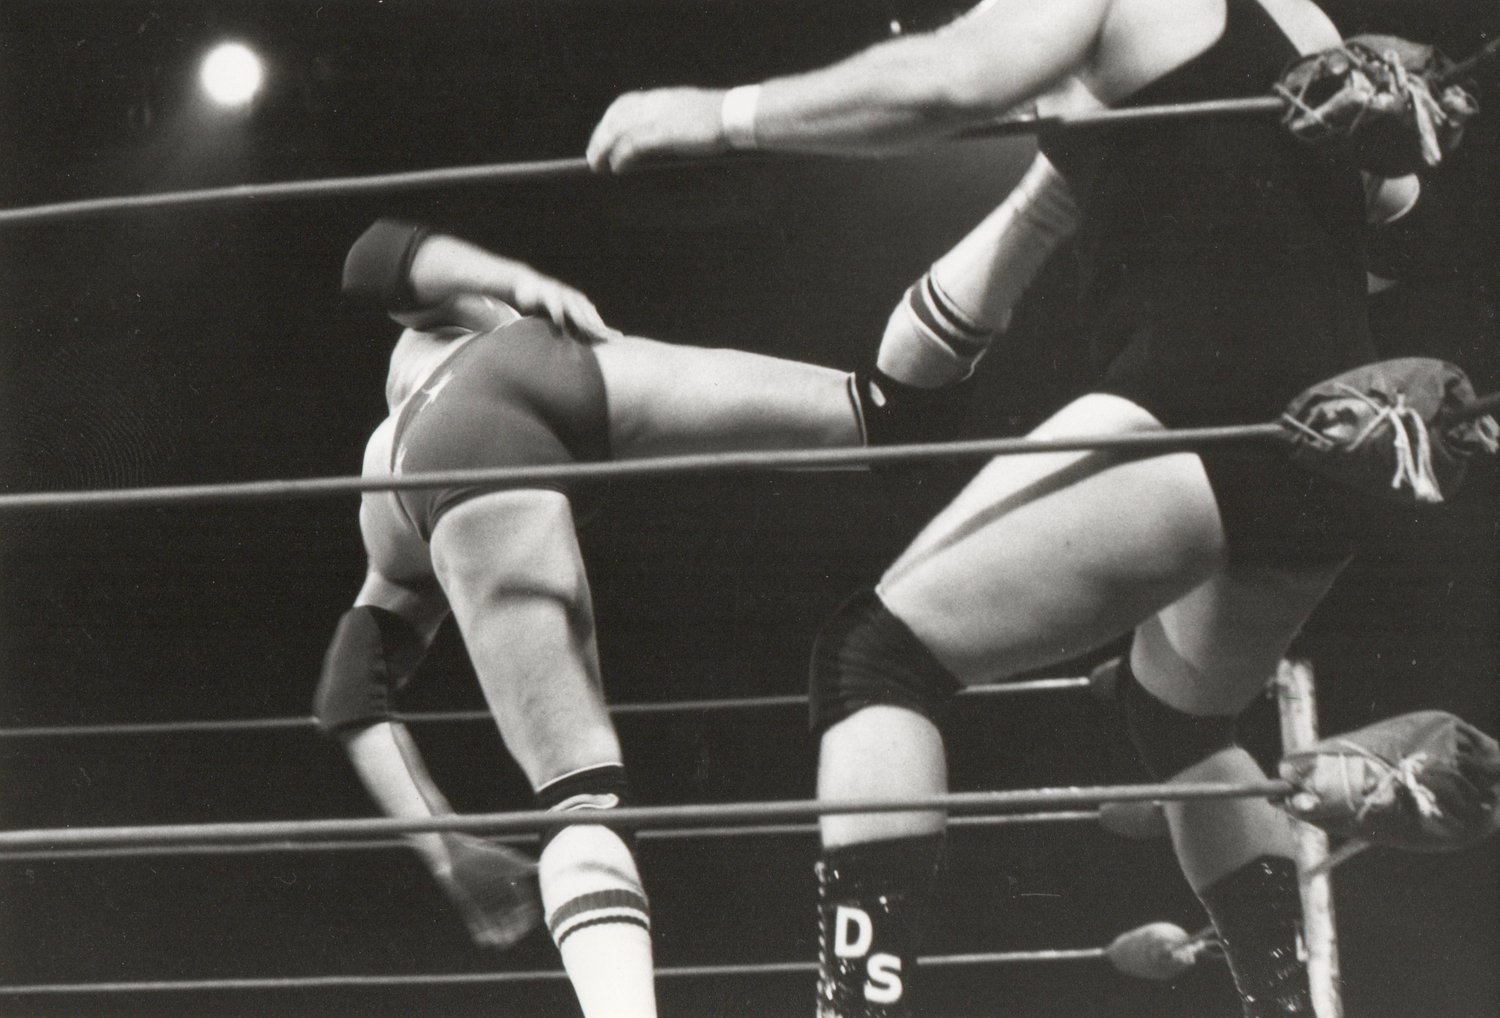 Image of Anonyme: wrestler against the ropes, ca. 1970s